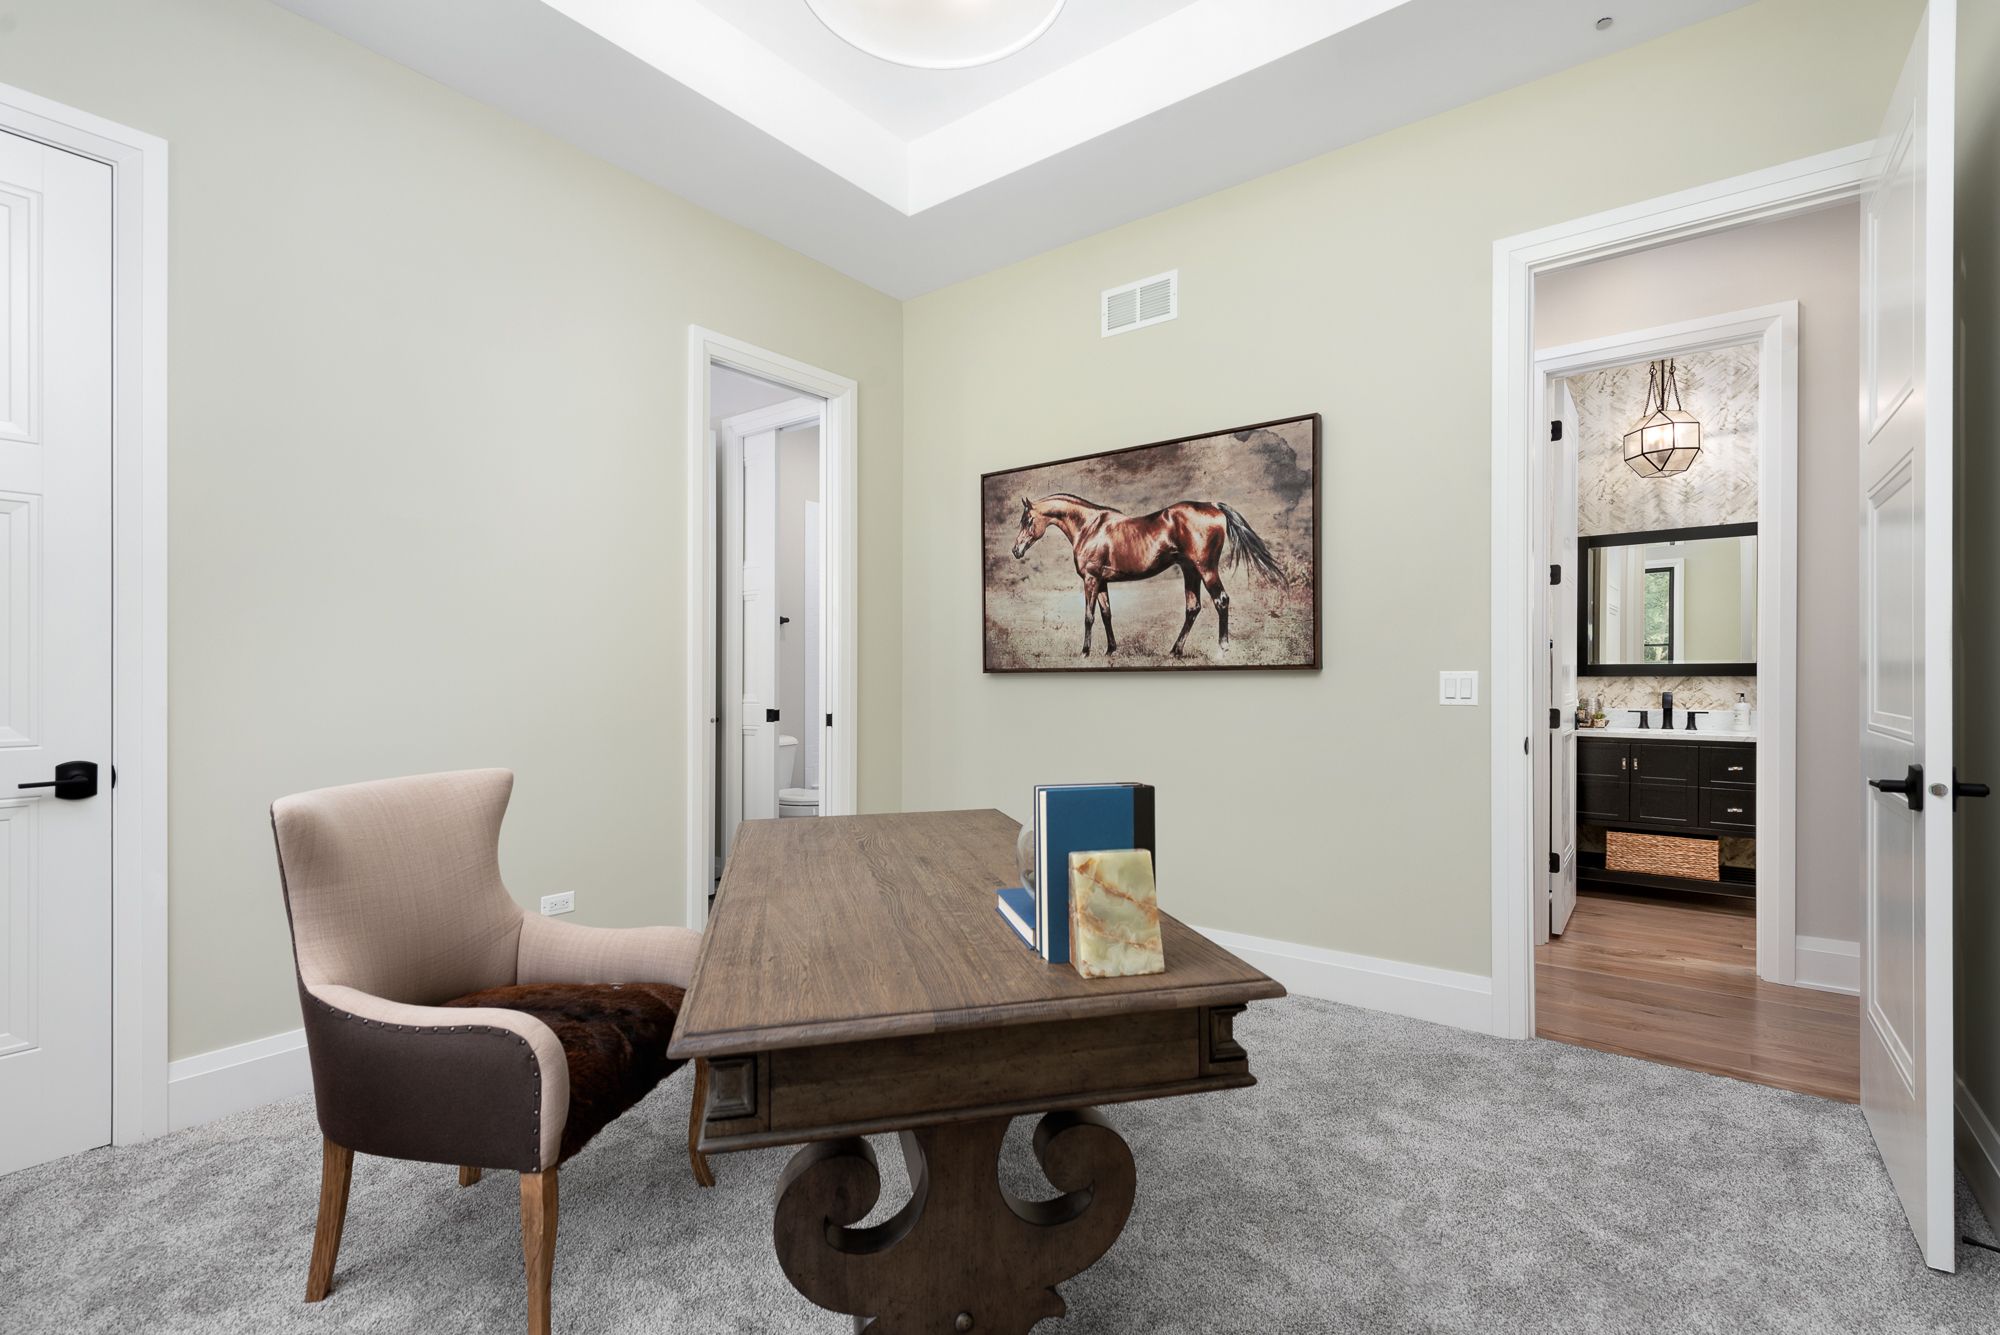 Home office with wood desk and horse artwork